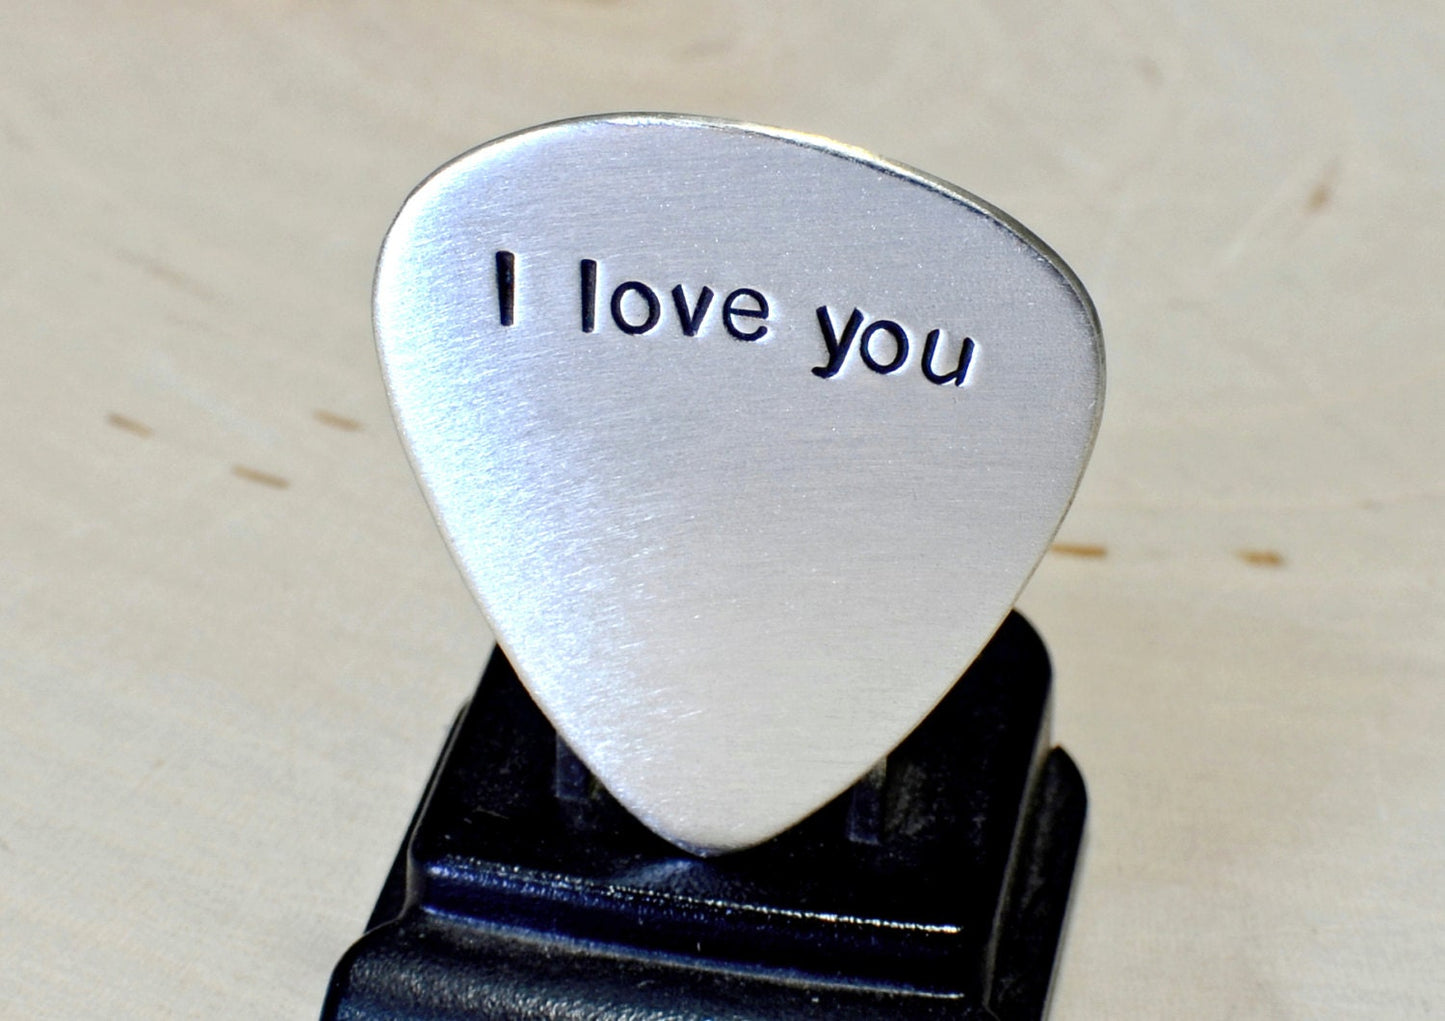 I love you sterling silver guitar pick